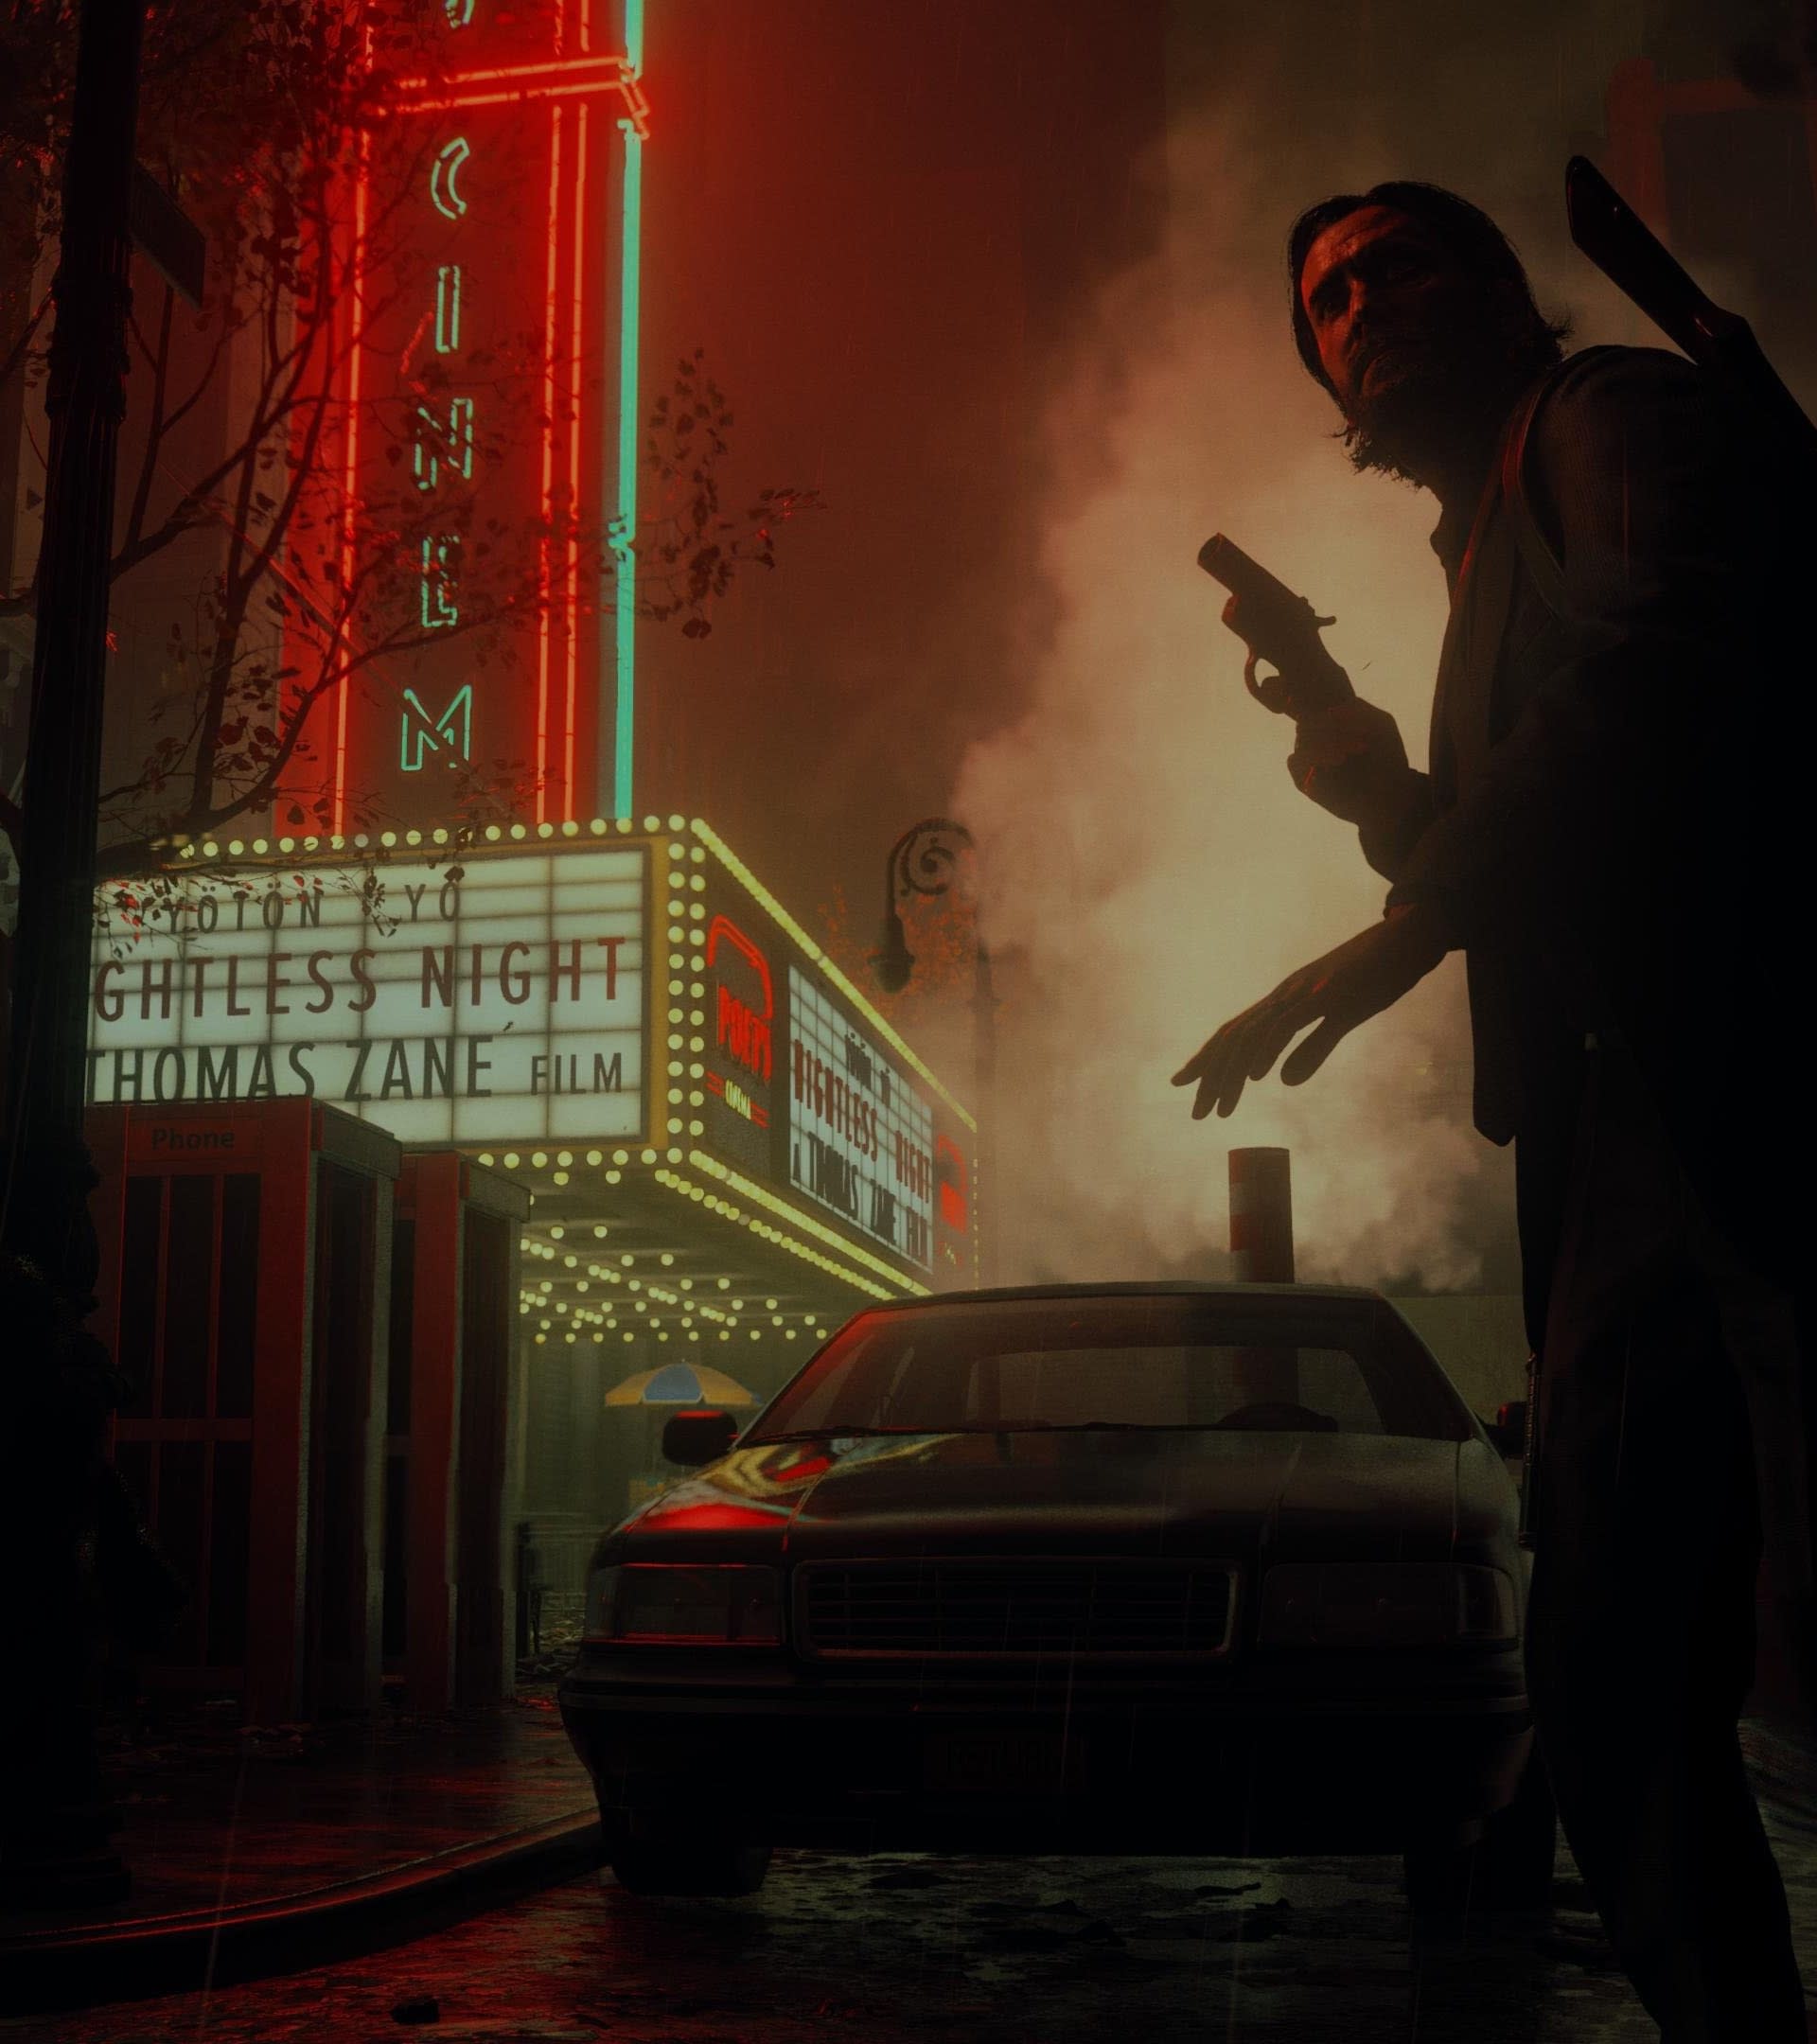 Alan Wake 2 is the Fastest Selling Game of Remedy!